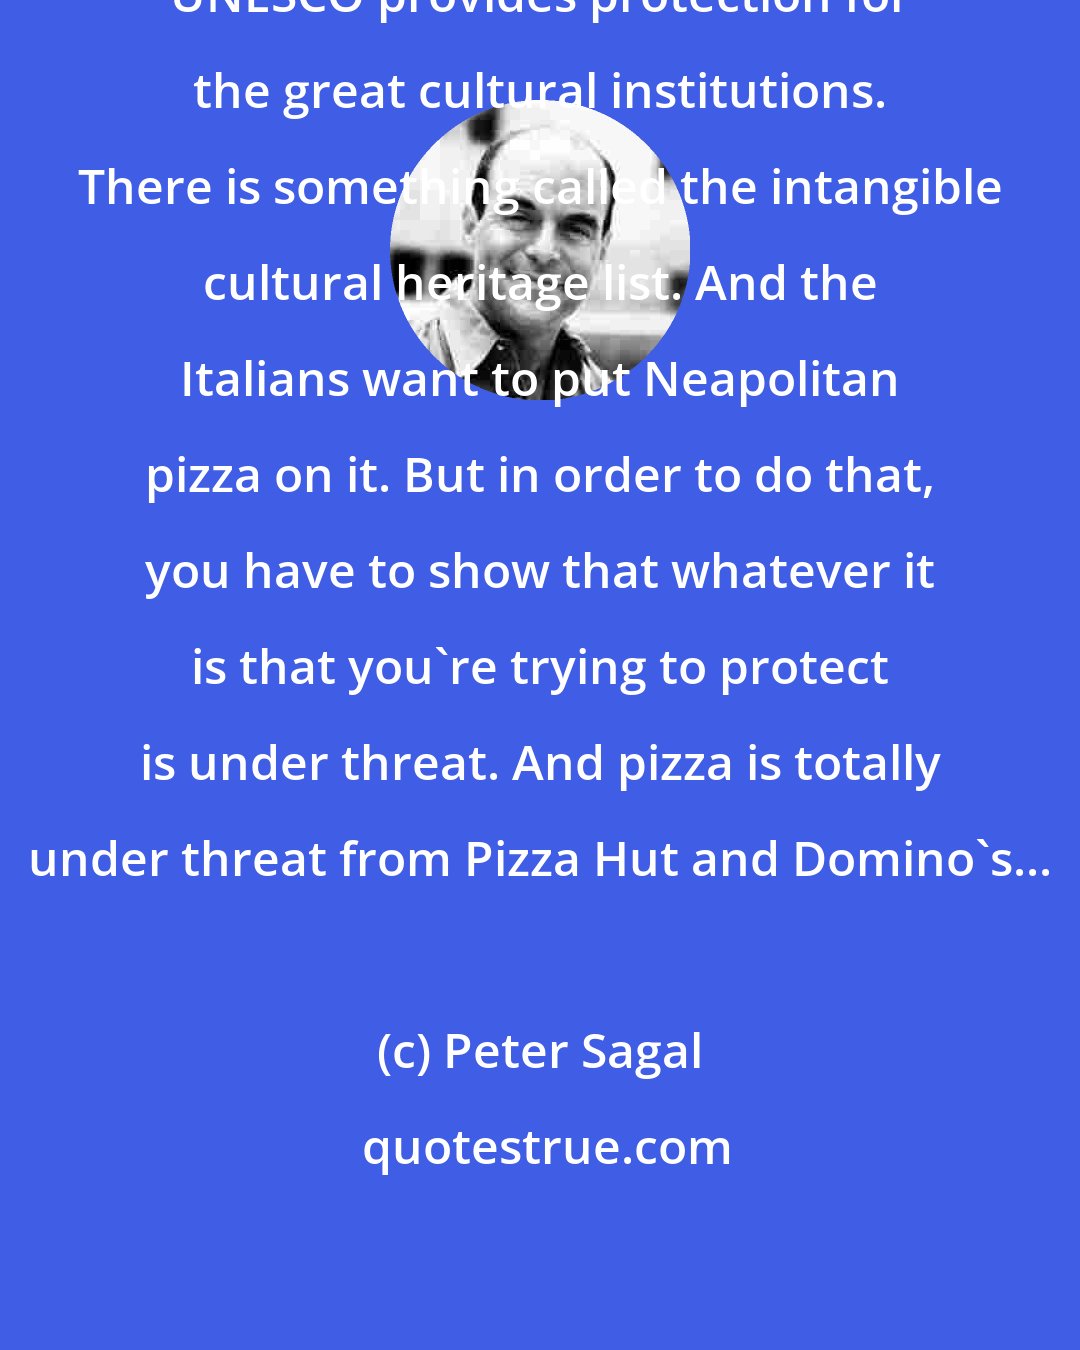 Peter Sagal: UNESCO provides protection for the great cultural institutions. There is something called the intangible cultural heritage list. And the Italians want to put Neapolitan pizza on it. But in order to do that, you have to show that whatever it is that you're trying to protect is under threat. And pizza is totally under threat from Pizza Hut and Domino's...